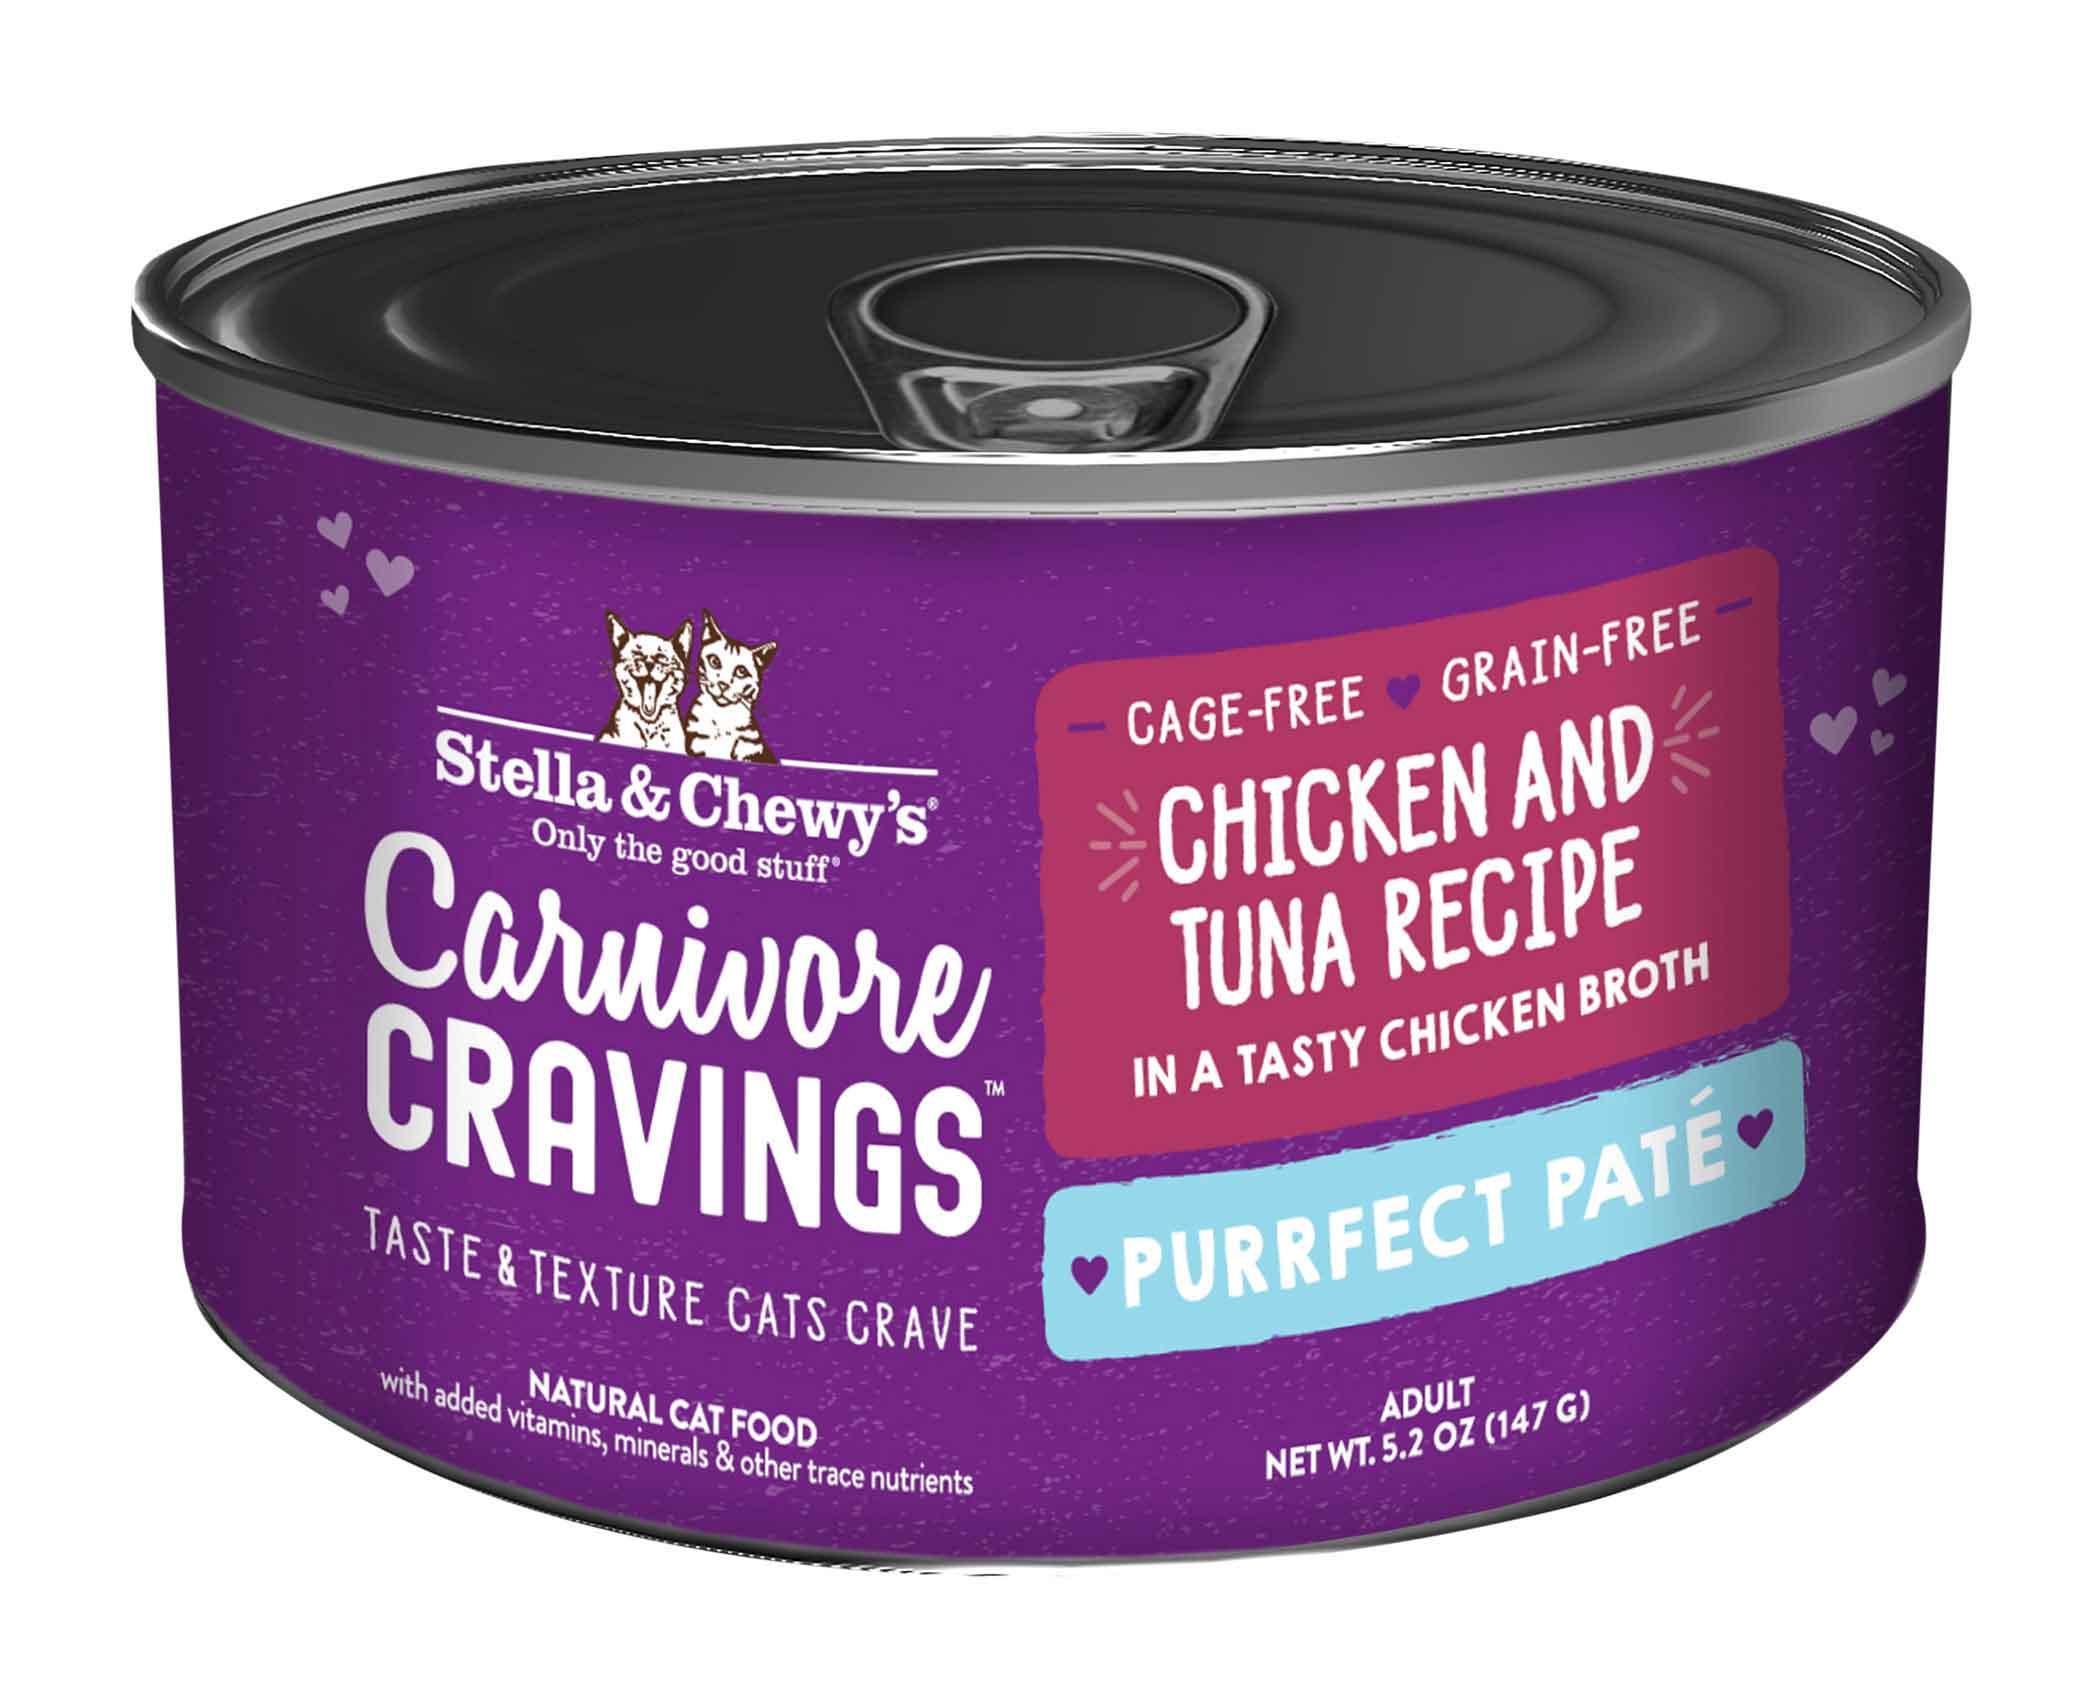 Stella & Chewy's Carnivore Cravings-Purrfect Pate Chicken & Tuna Pate Recipe in Broth Wet Cat Food, 5.2 Ounces